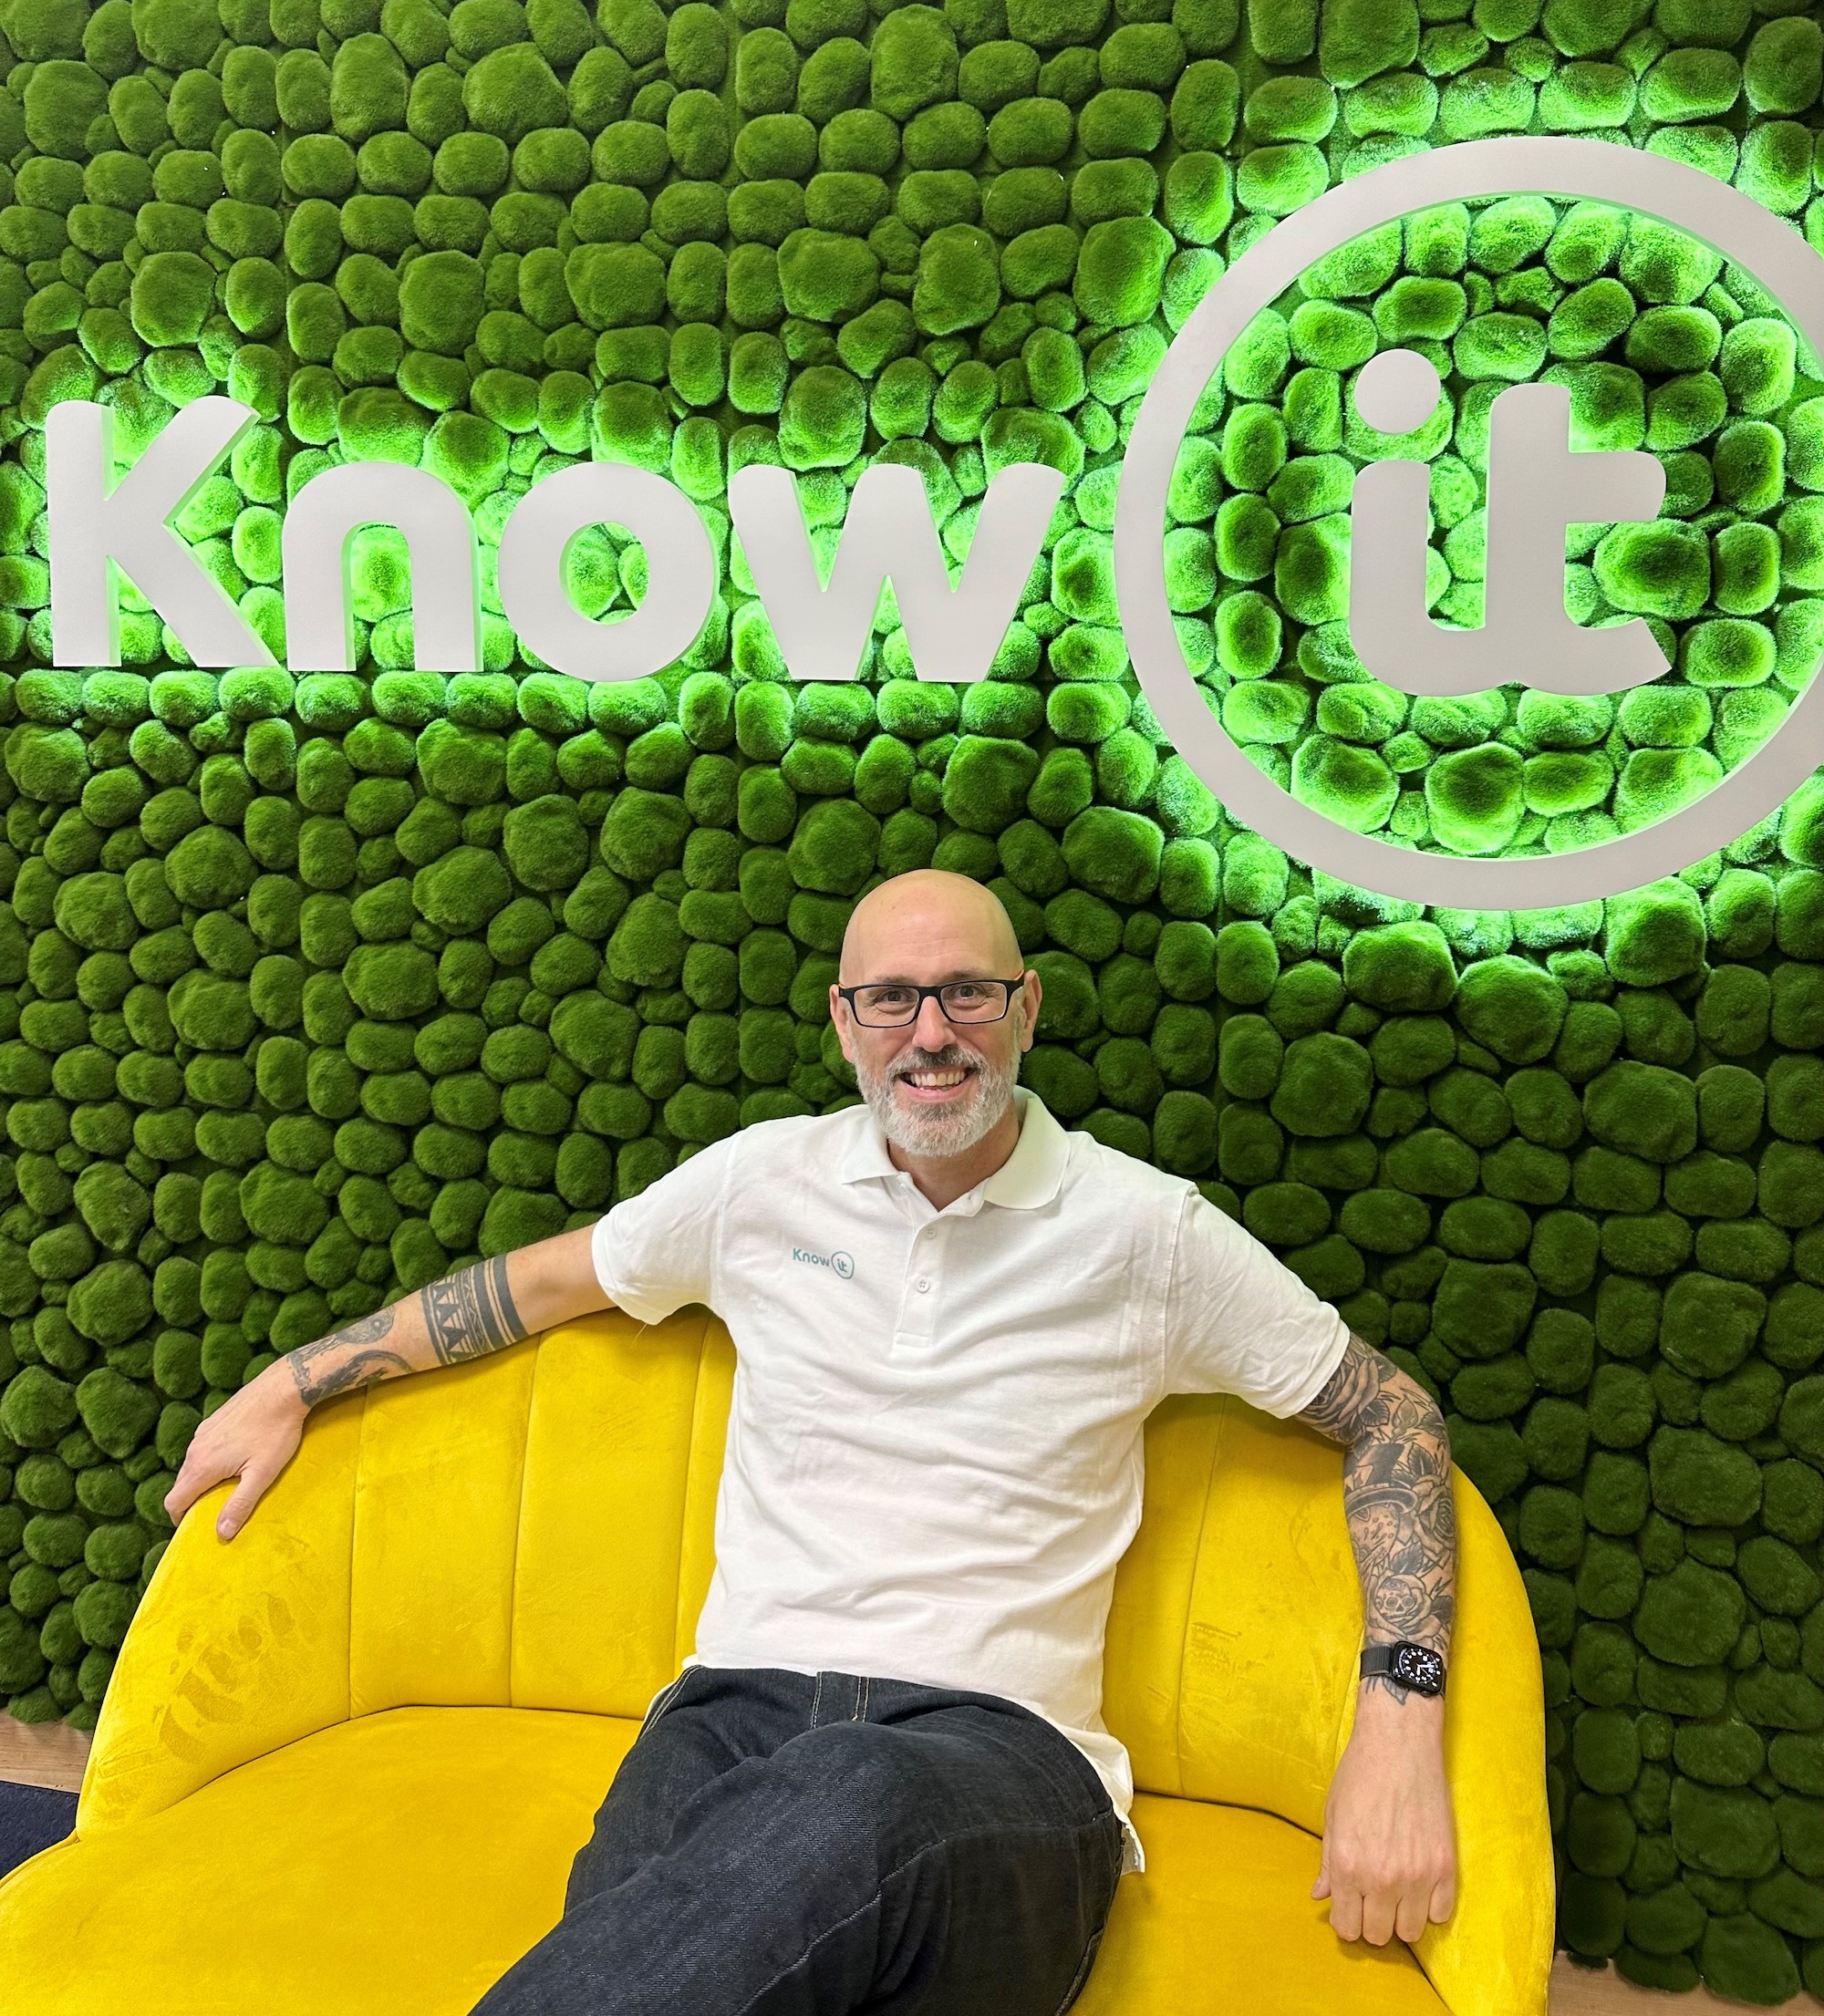 Glasgow fintech Know-it announces Phil Hobden as head of strategy and growth